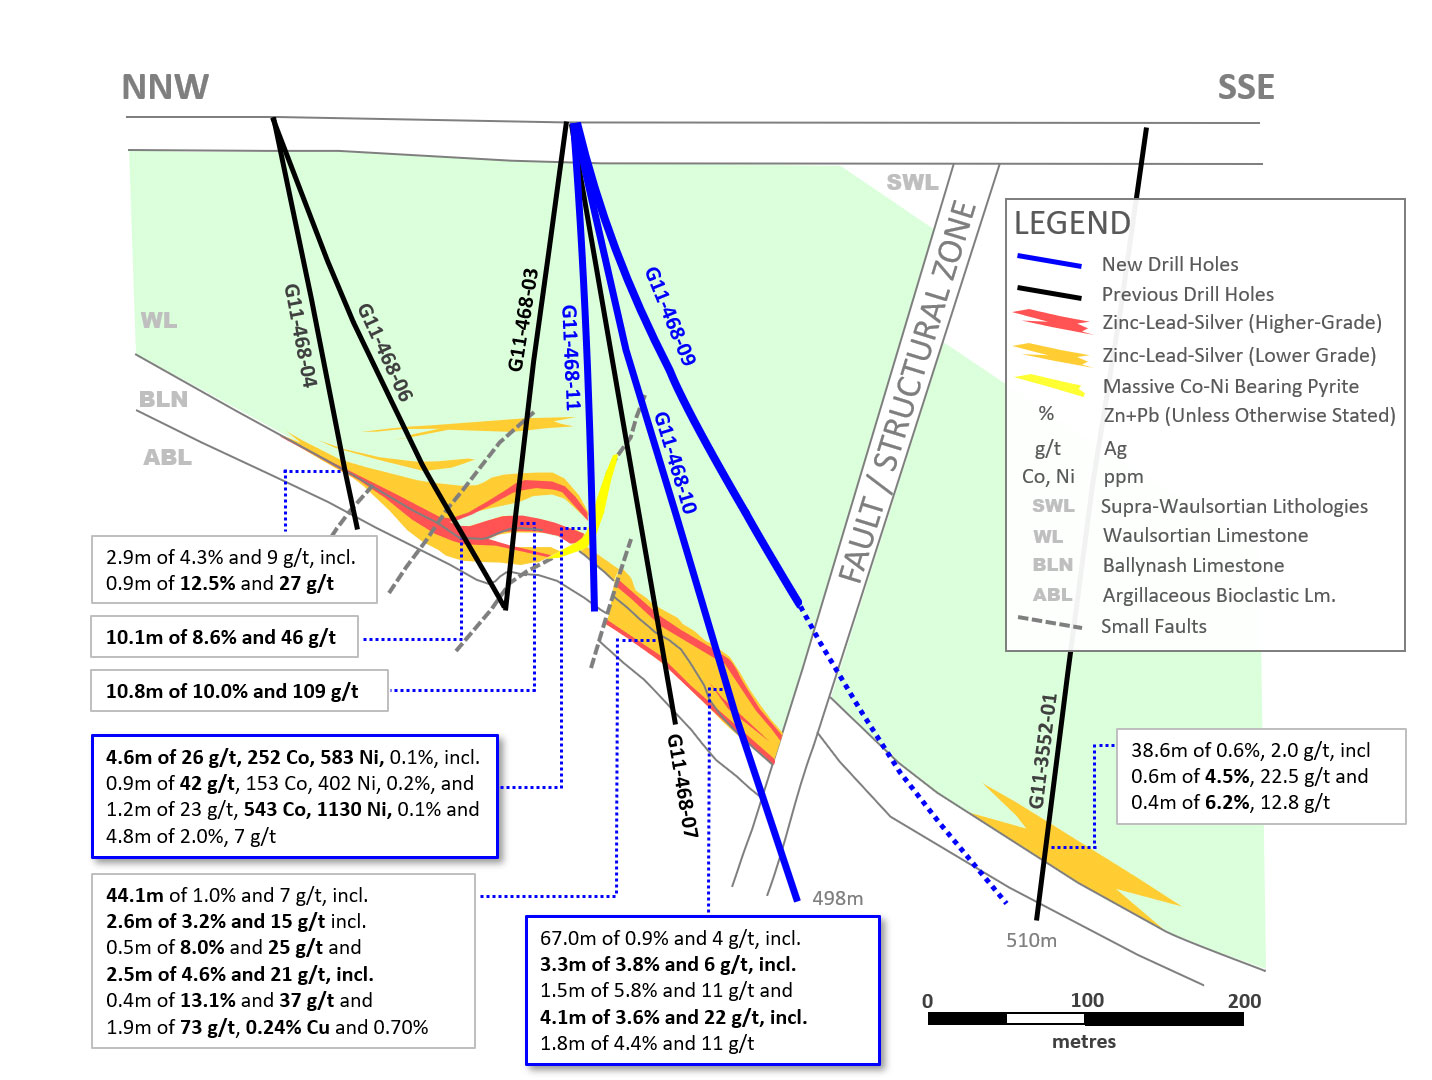 Exhibit 5. Cross-Section of New Drilling at Ballywire Discovery, PG West Project, Ireland